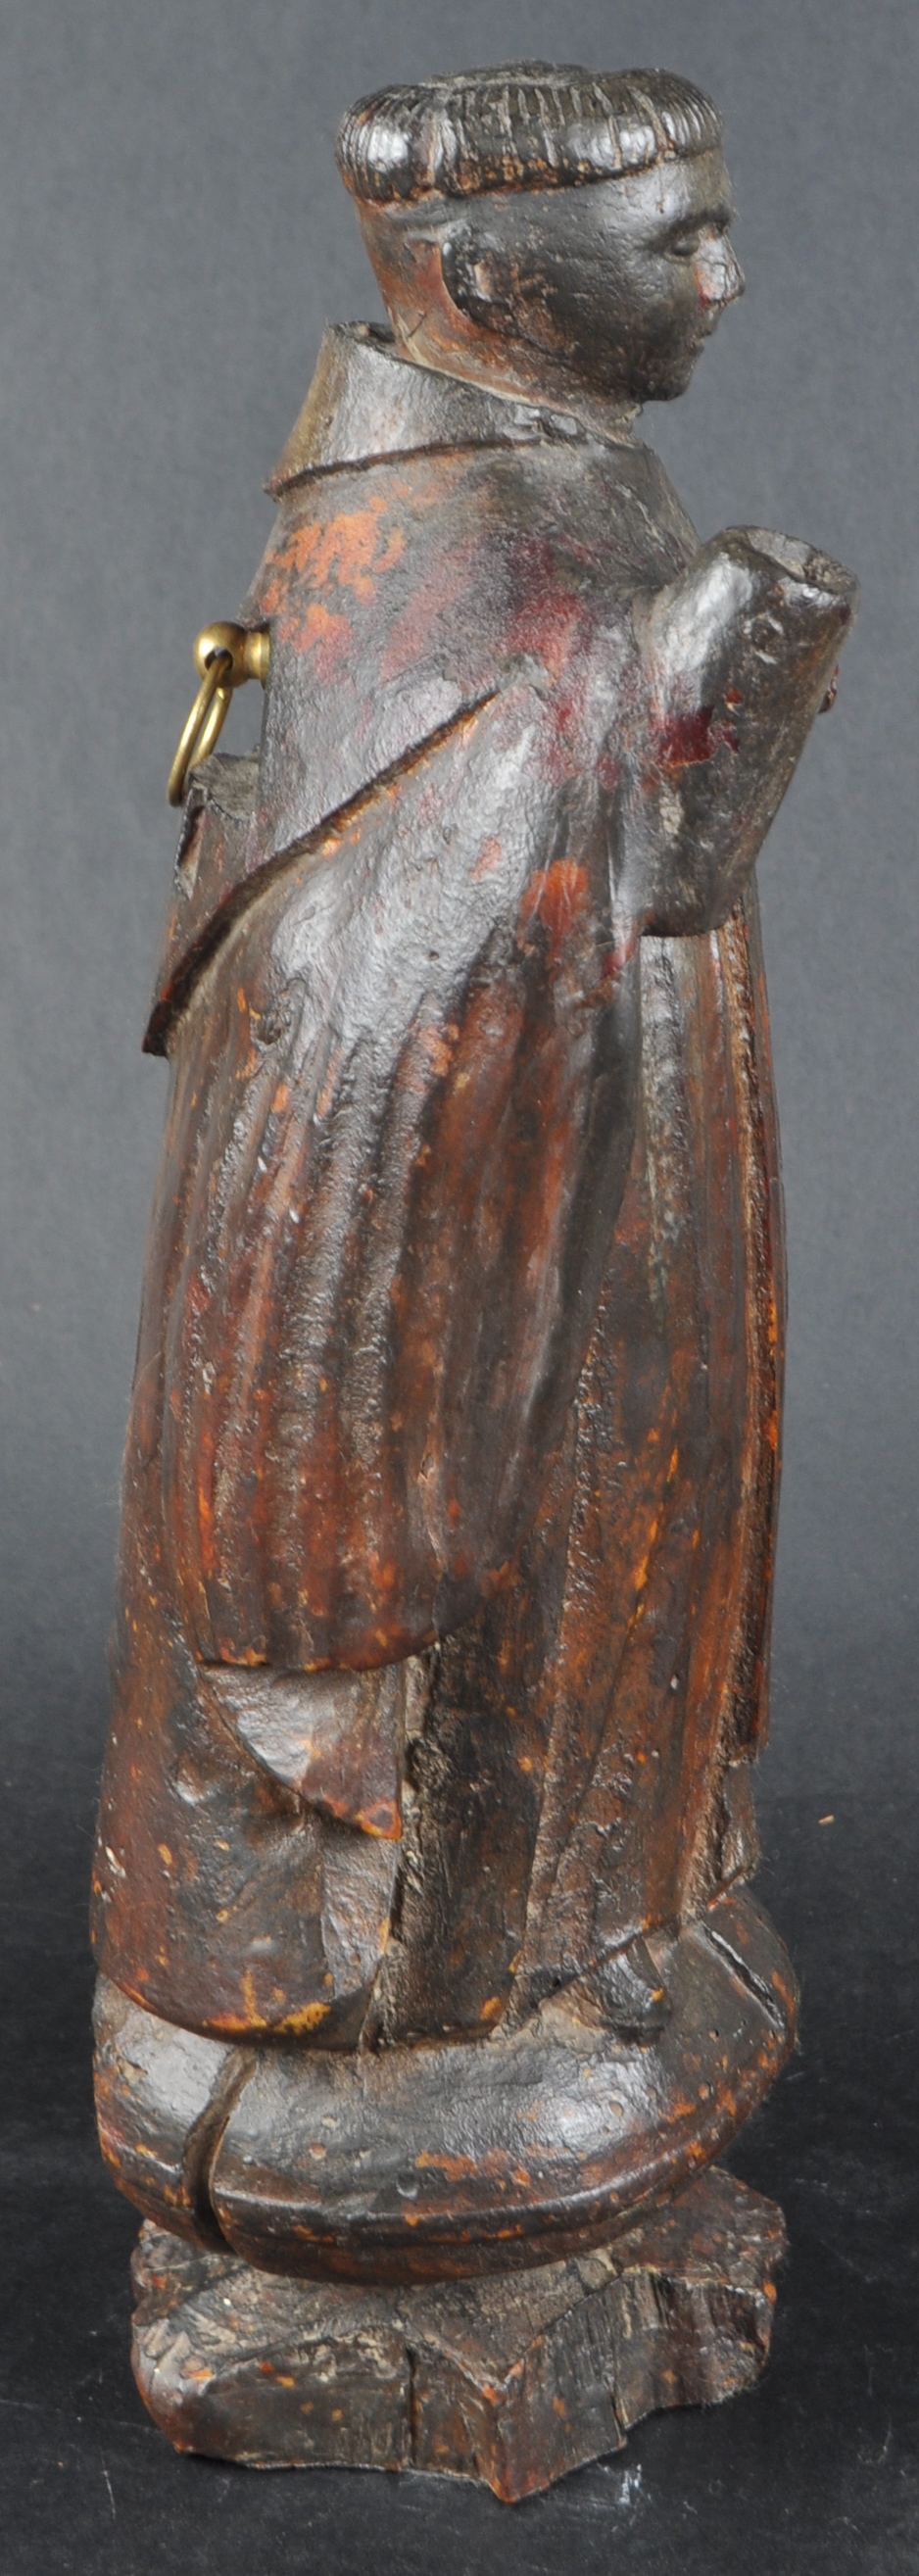 19TH CENTURY WALNUT CARVING OF A MONK - Image 6 of 6